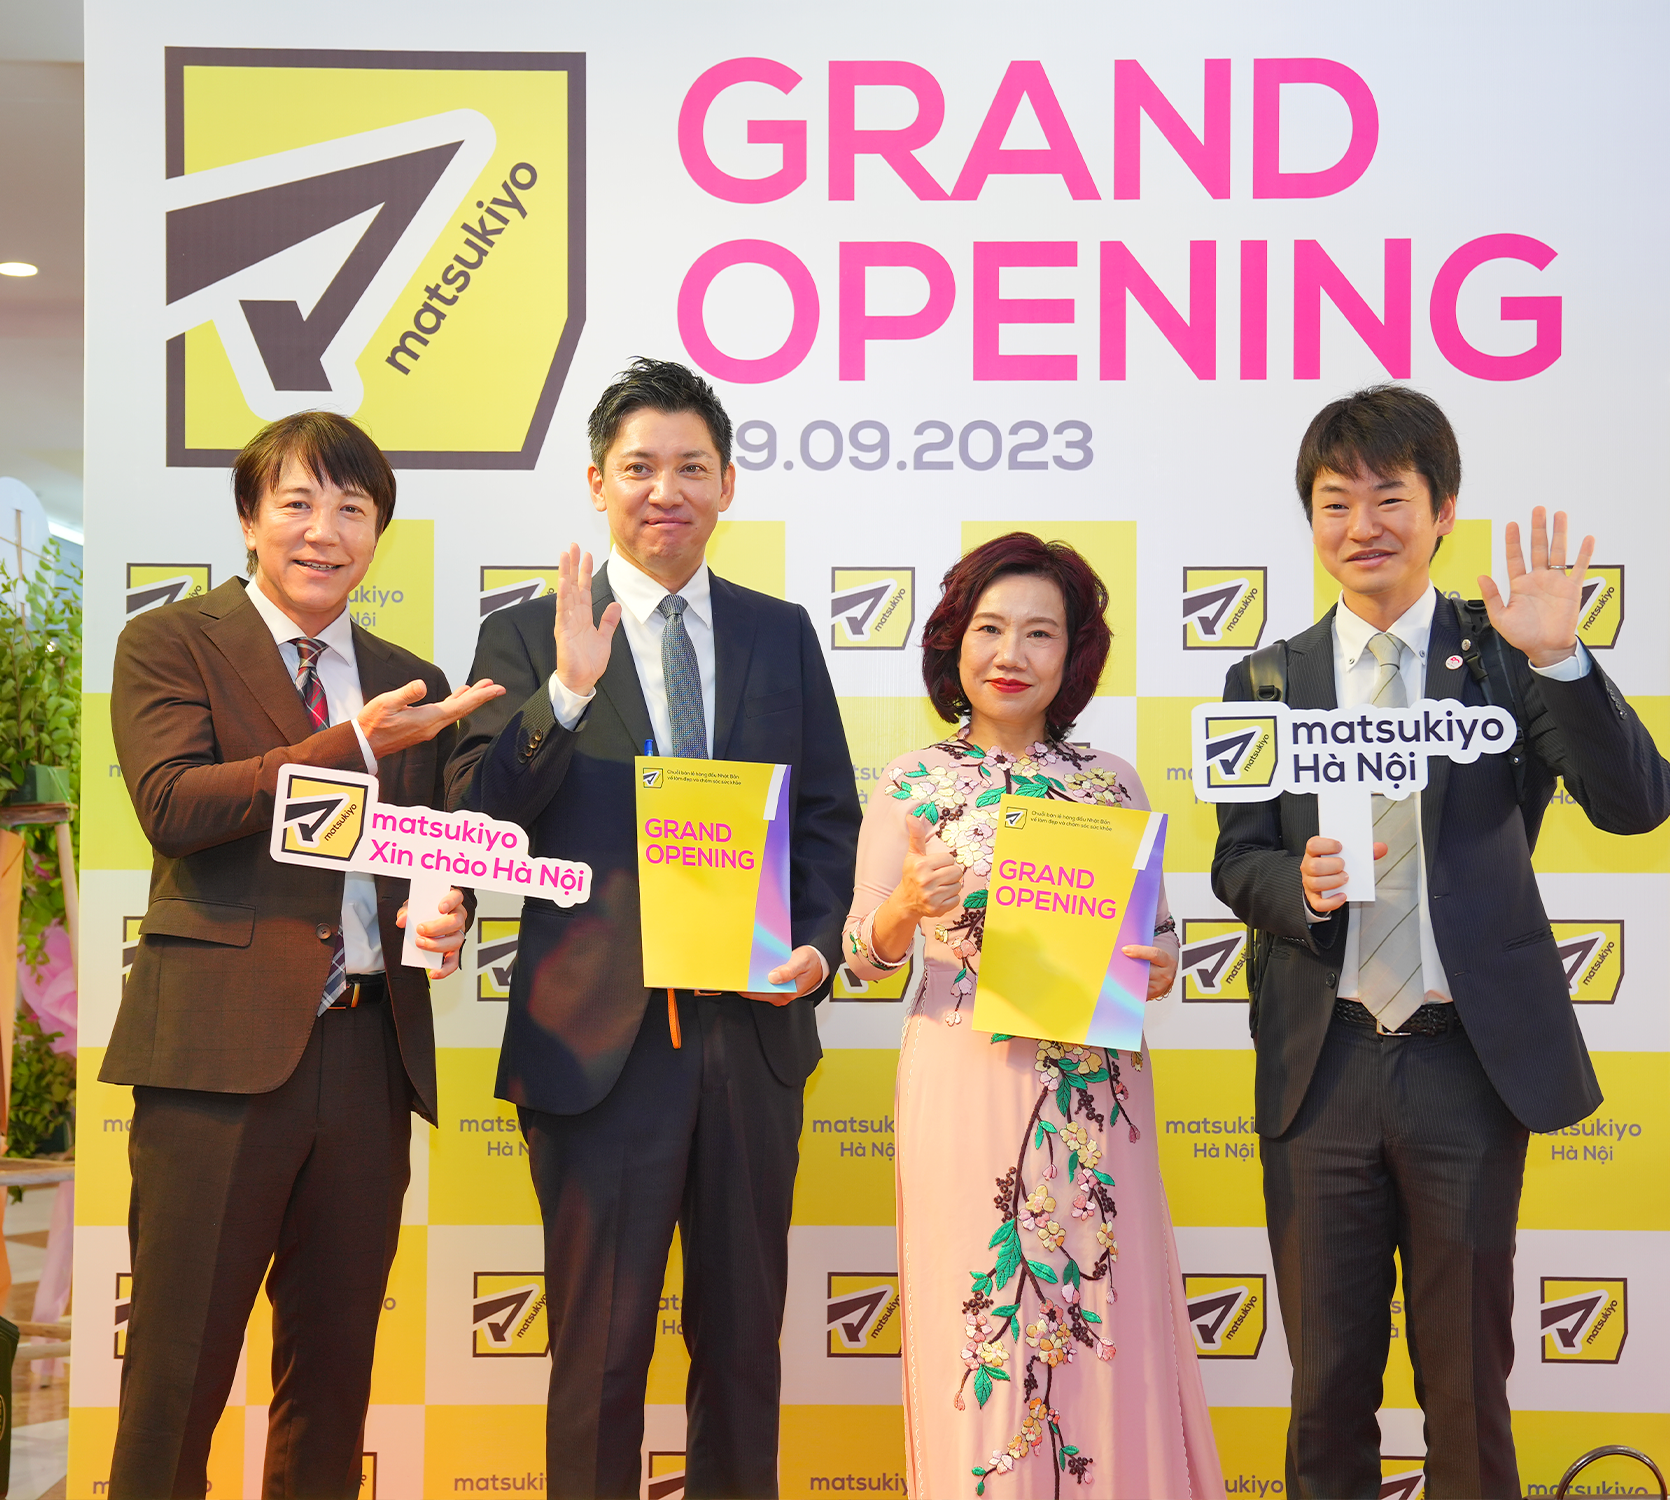 The event marks an important step forward for Matsukiyo in the Vietnamese market and offers Hanoi customers quality Japanese-style products and services.